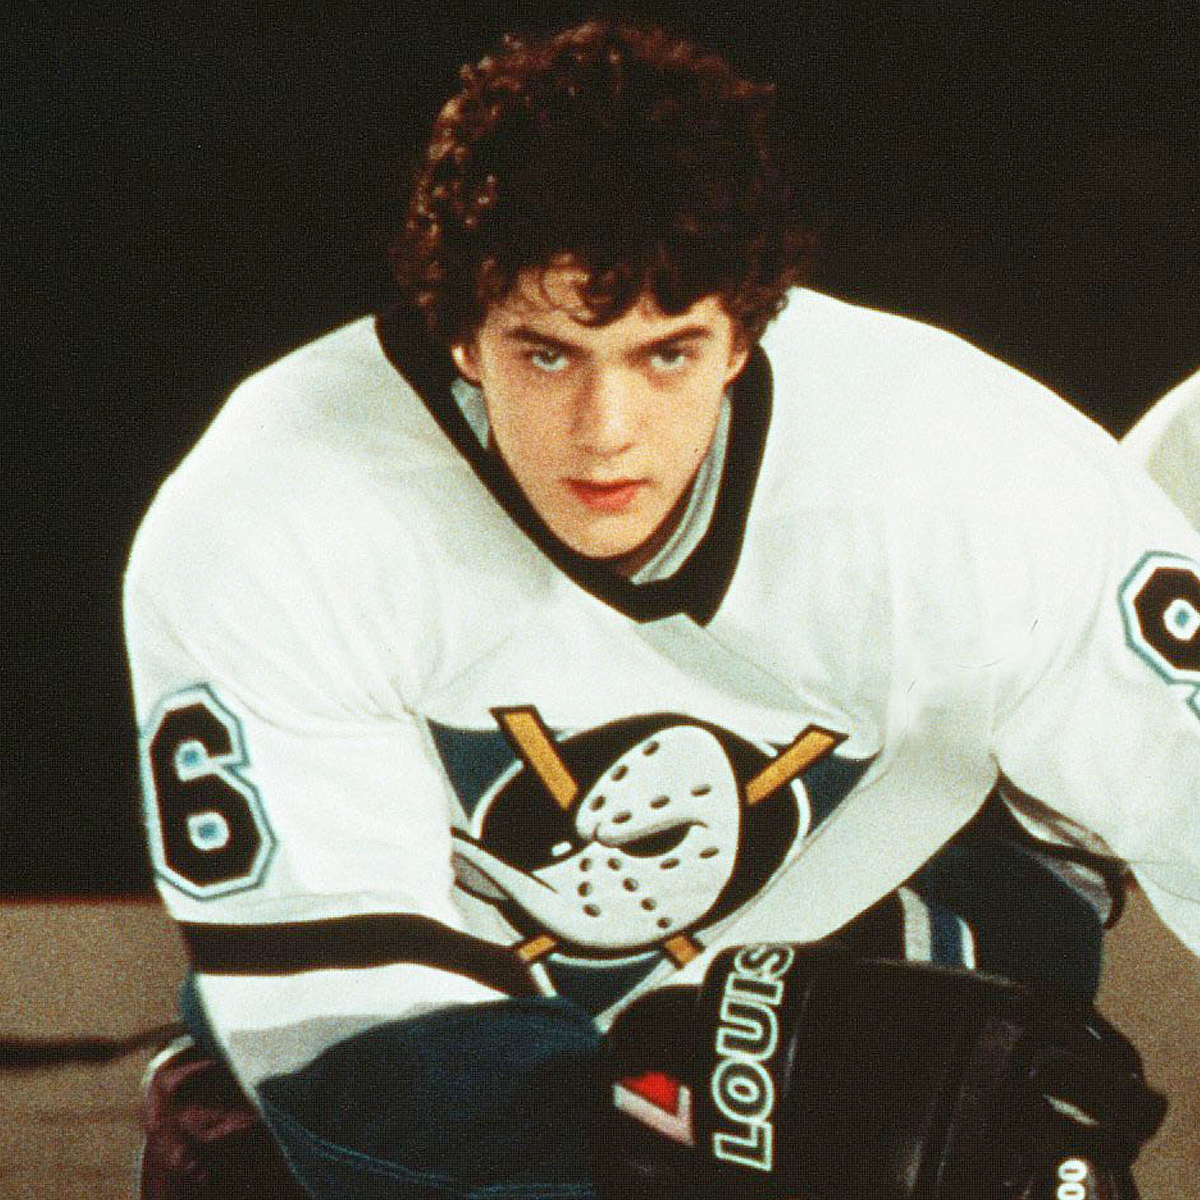 Top 10 Worst Sports Movies: No. 3 D2: The Mighty Ducks